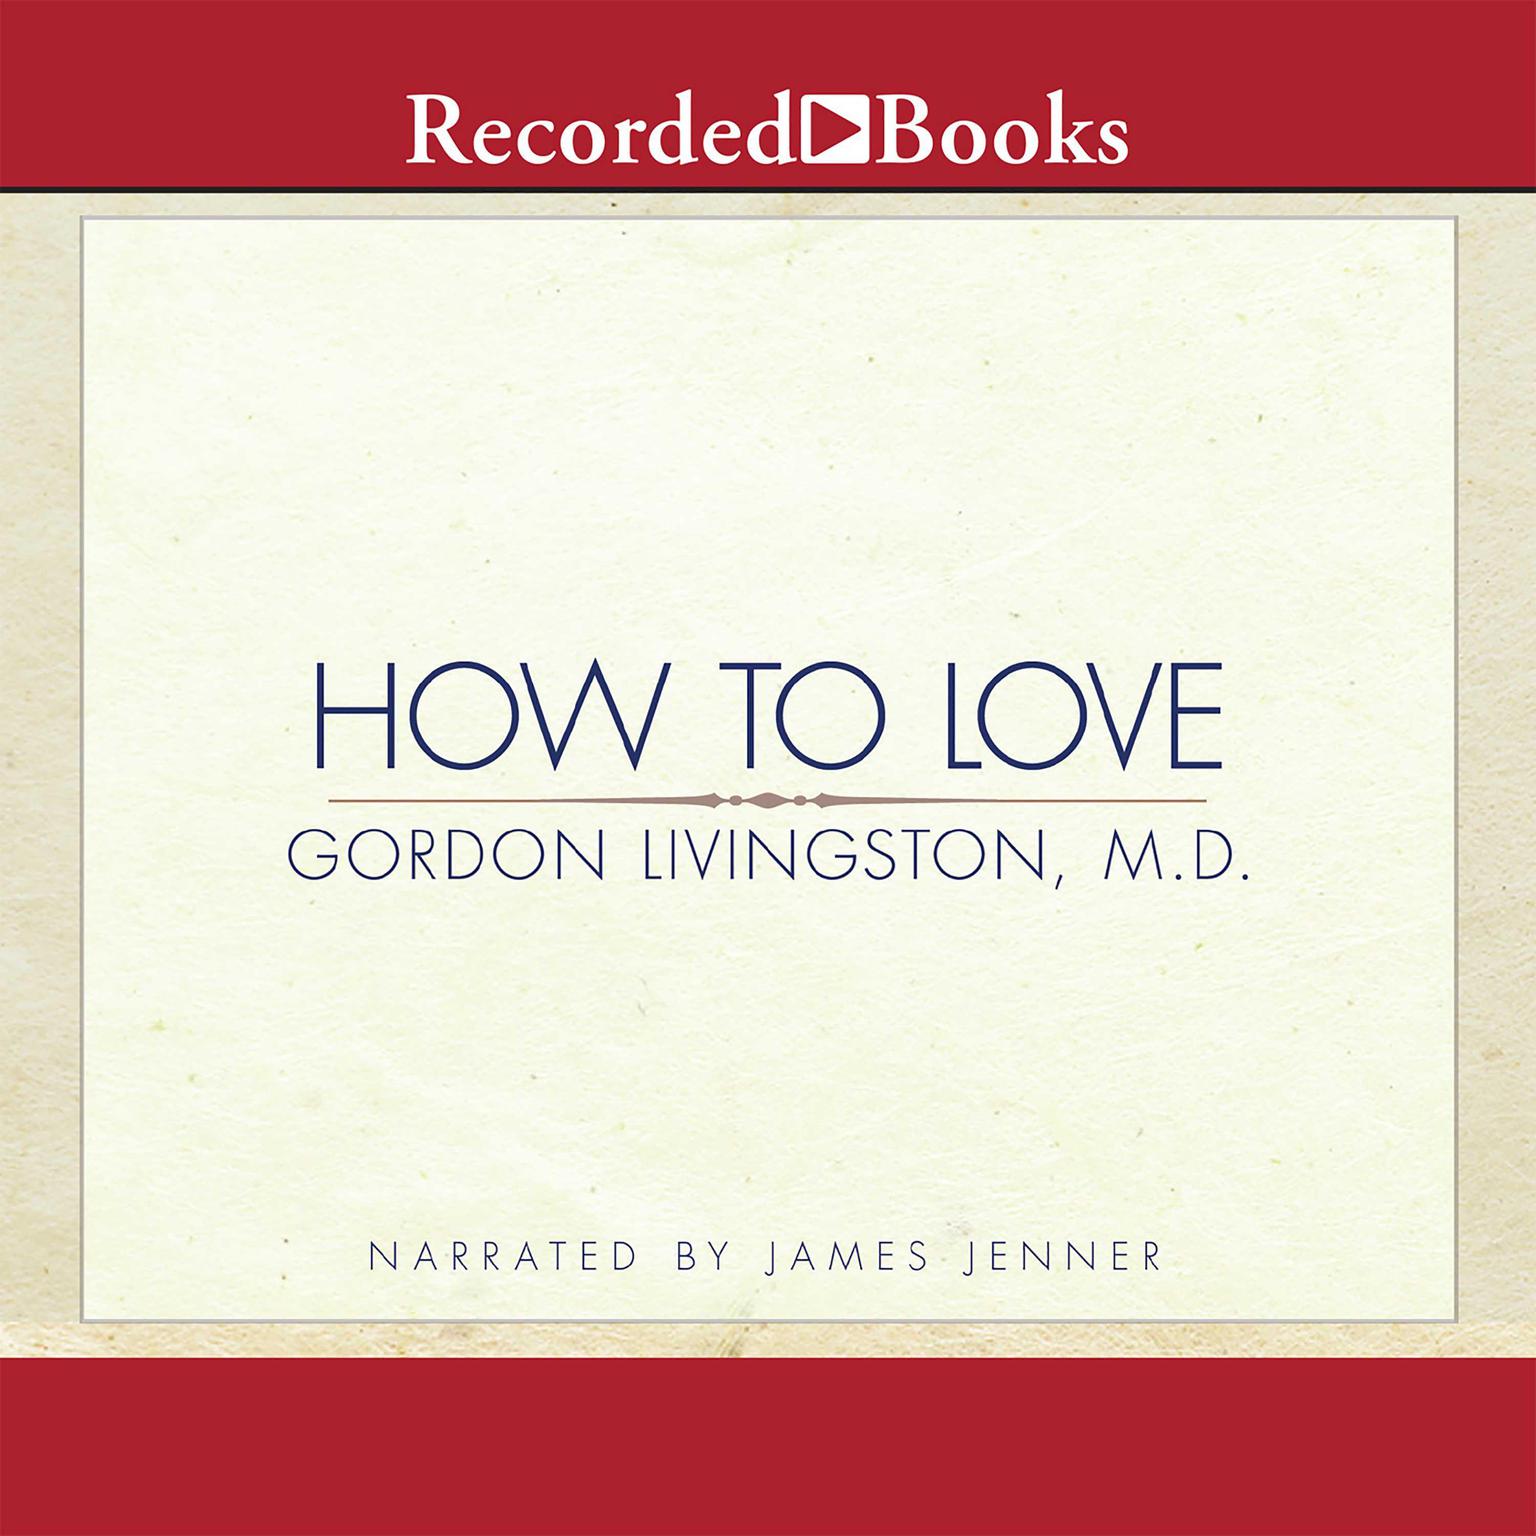 How to Love: Choosing Well at Every Stage of Life Audiobook, by Gordon Livingston